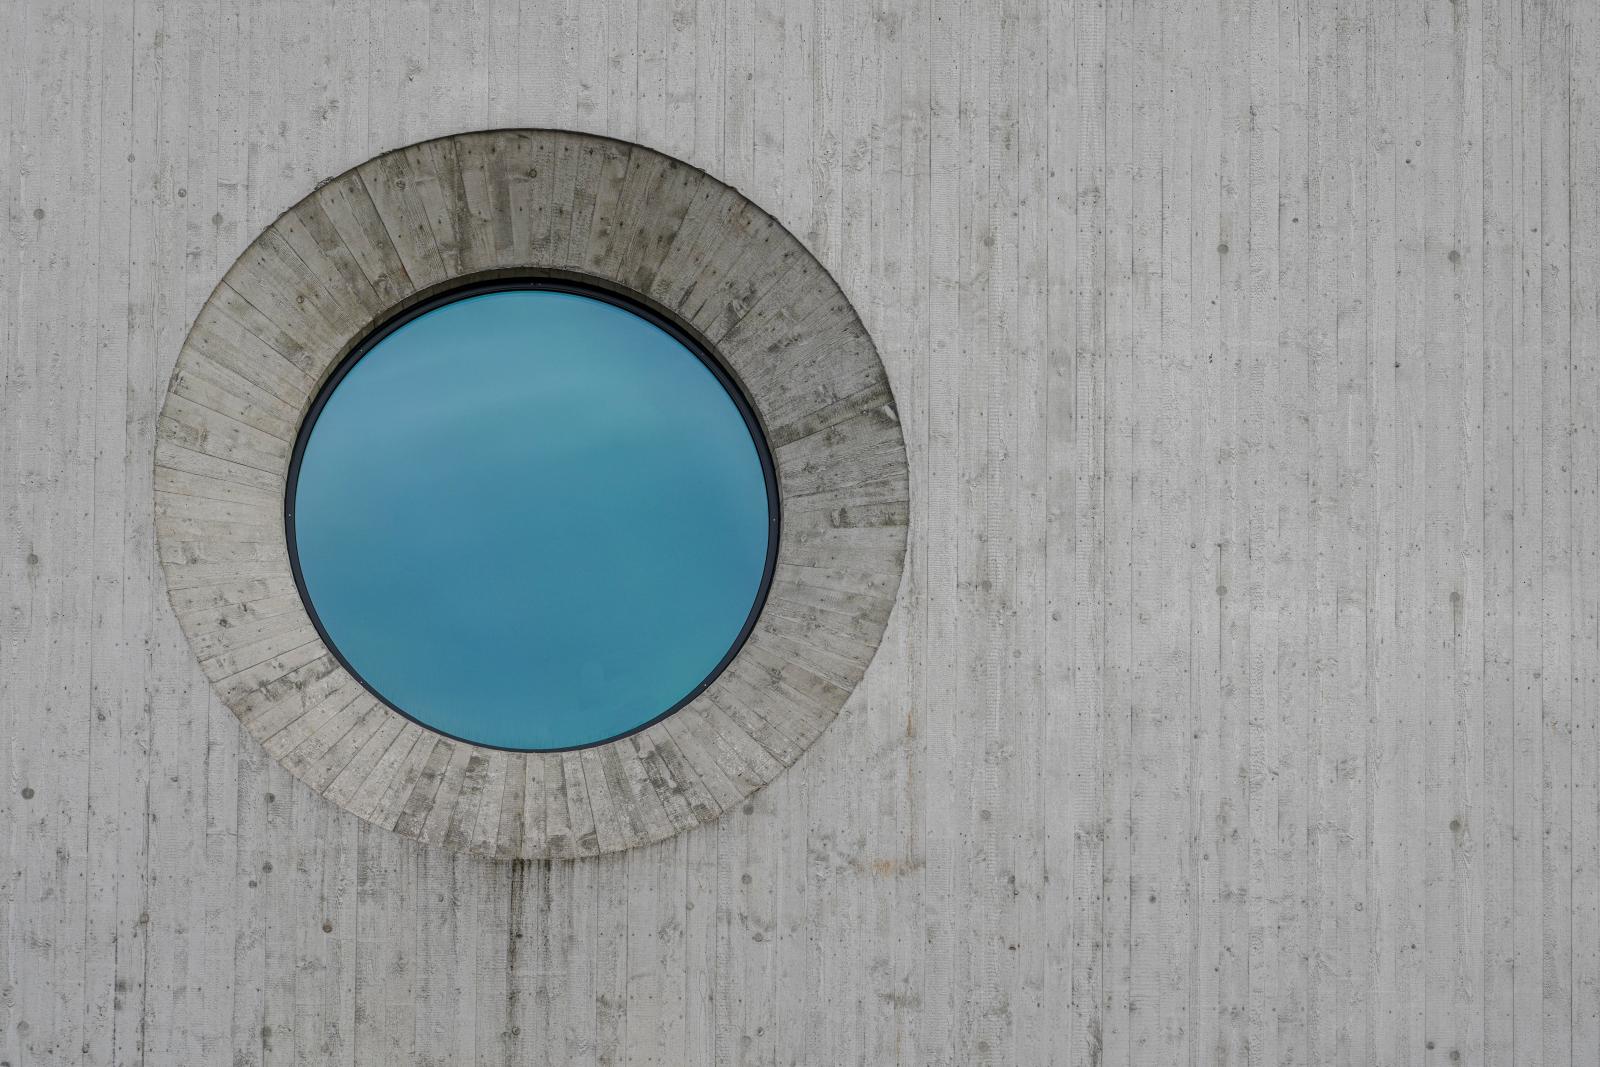 Architectural Solitude: Circle of Clarity